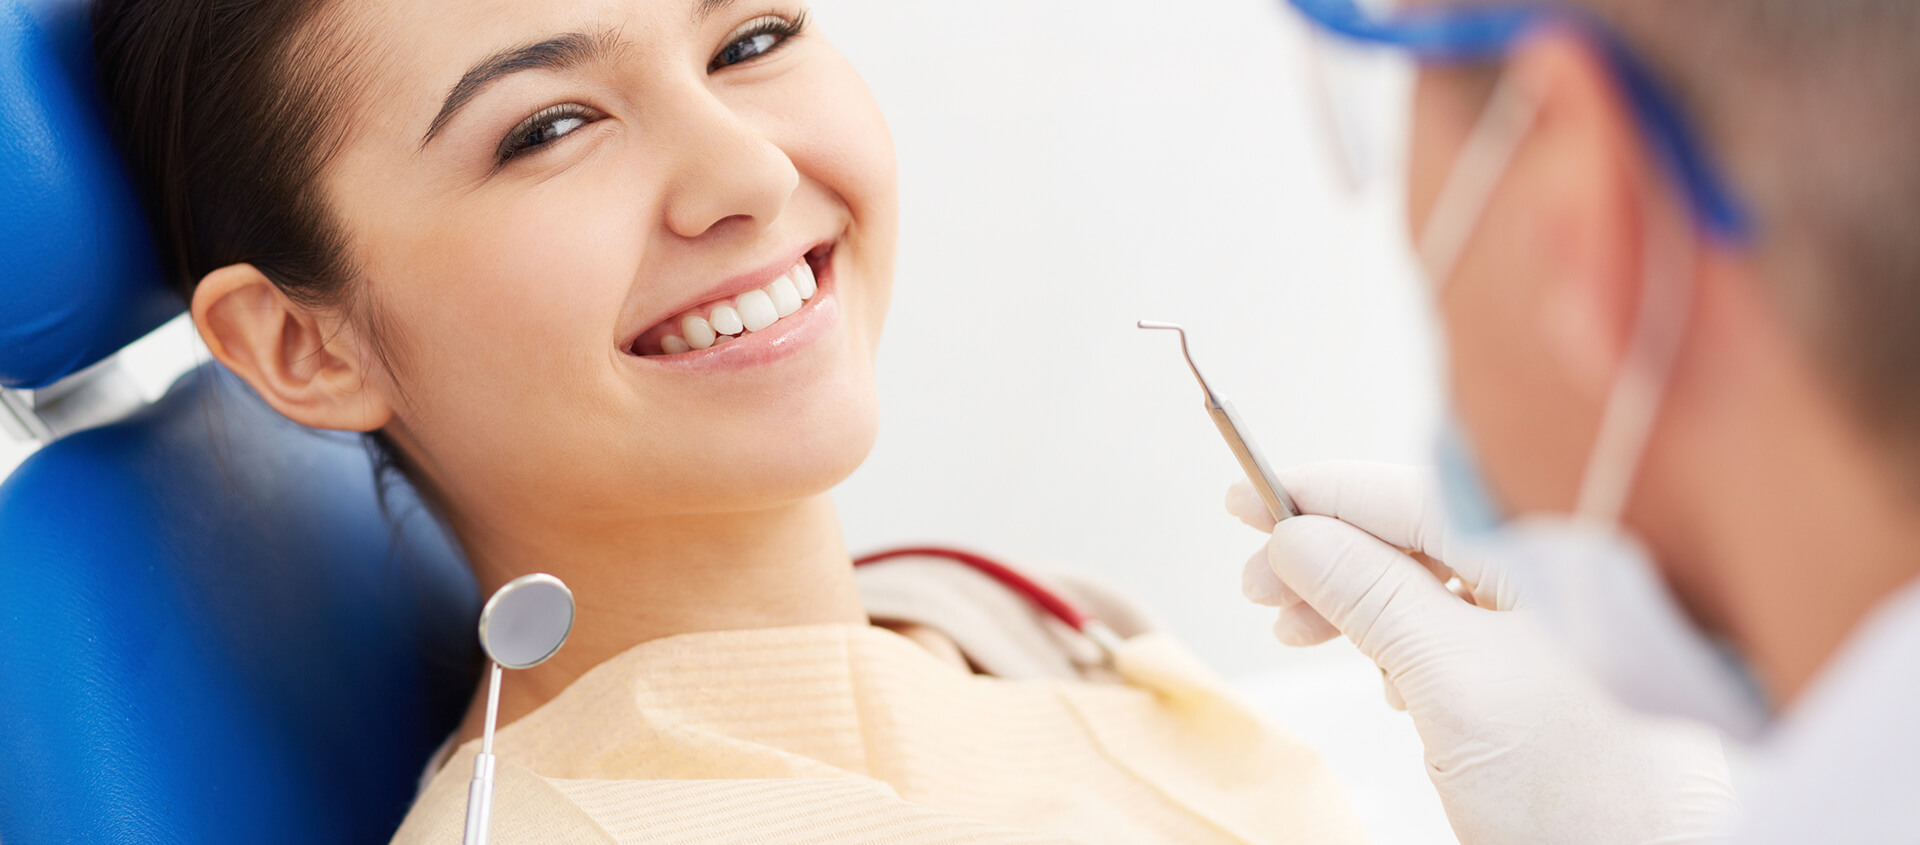 Renew or Makeover Your Smile with Cosmetic Dentist Services in the Muncie, IN Area